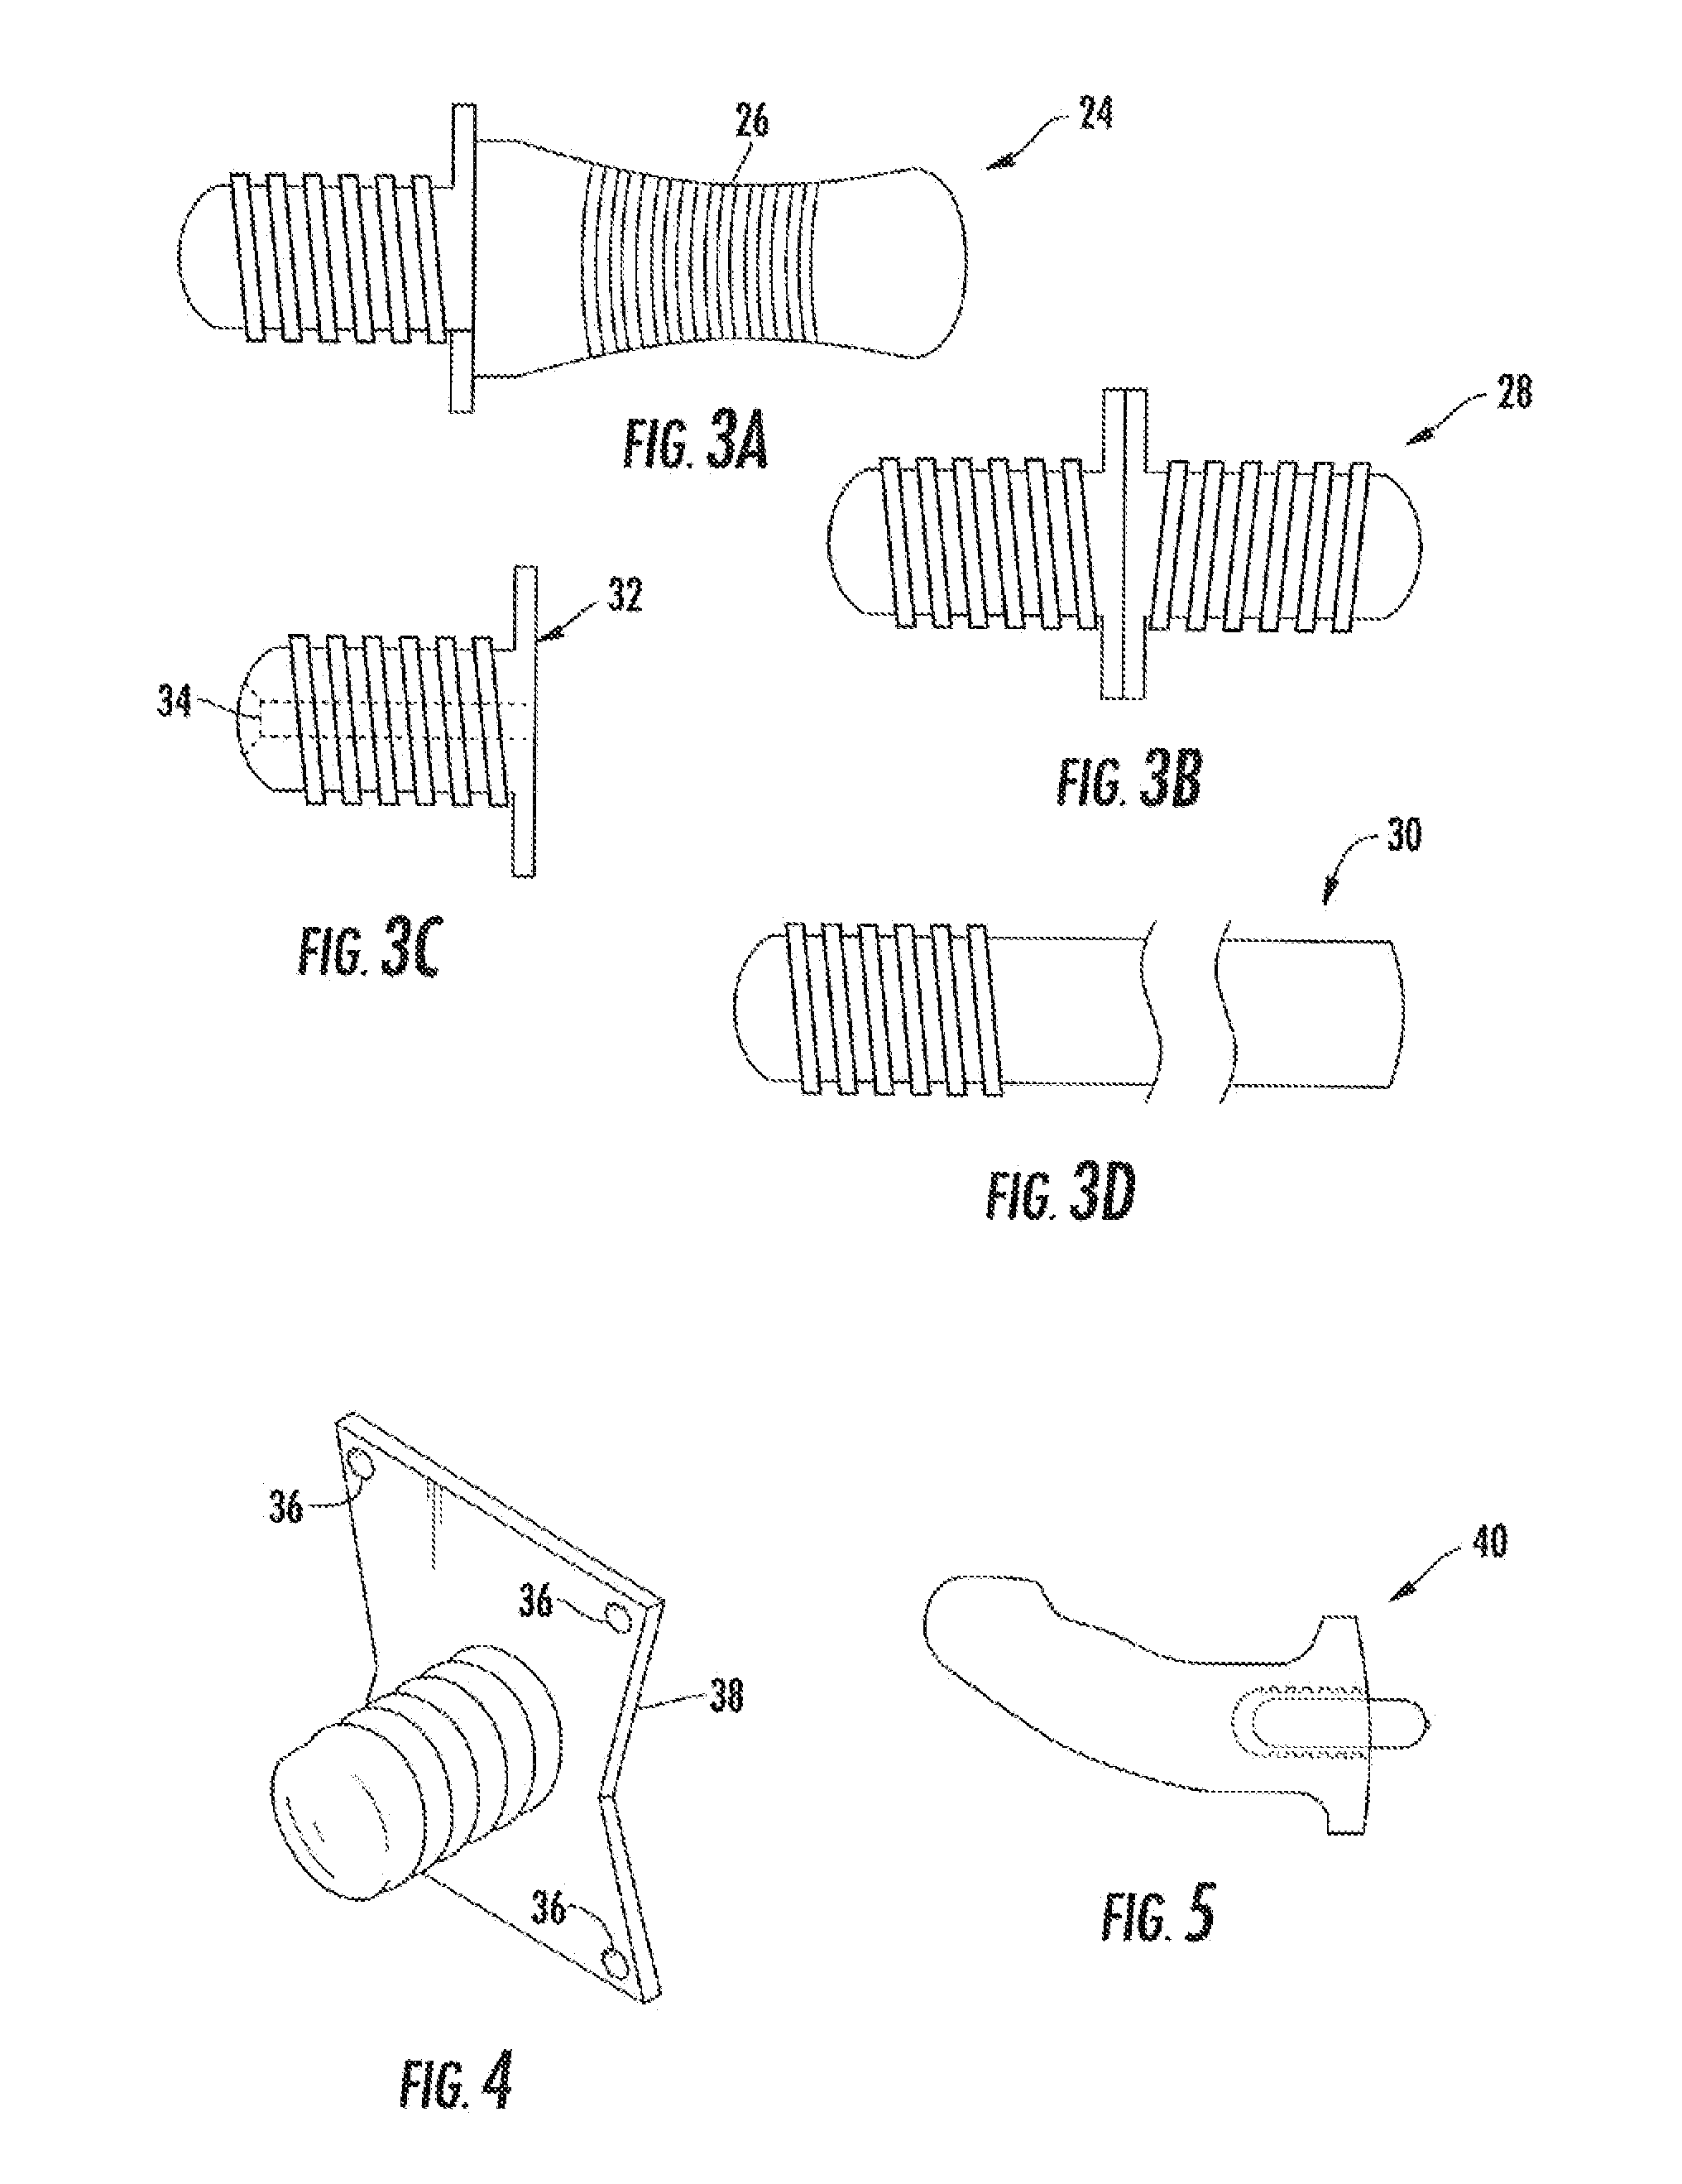 Phallus device and system with screw attachment